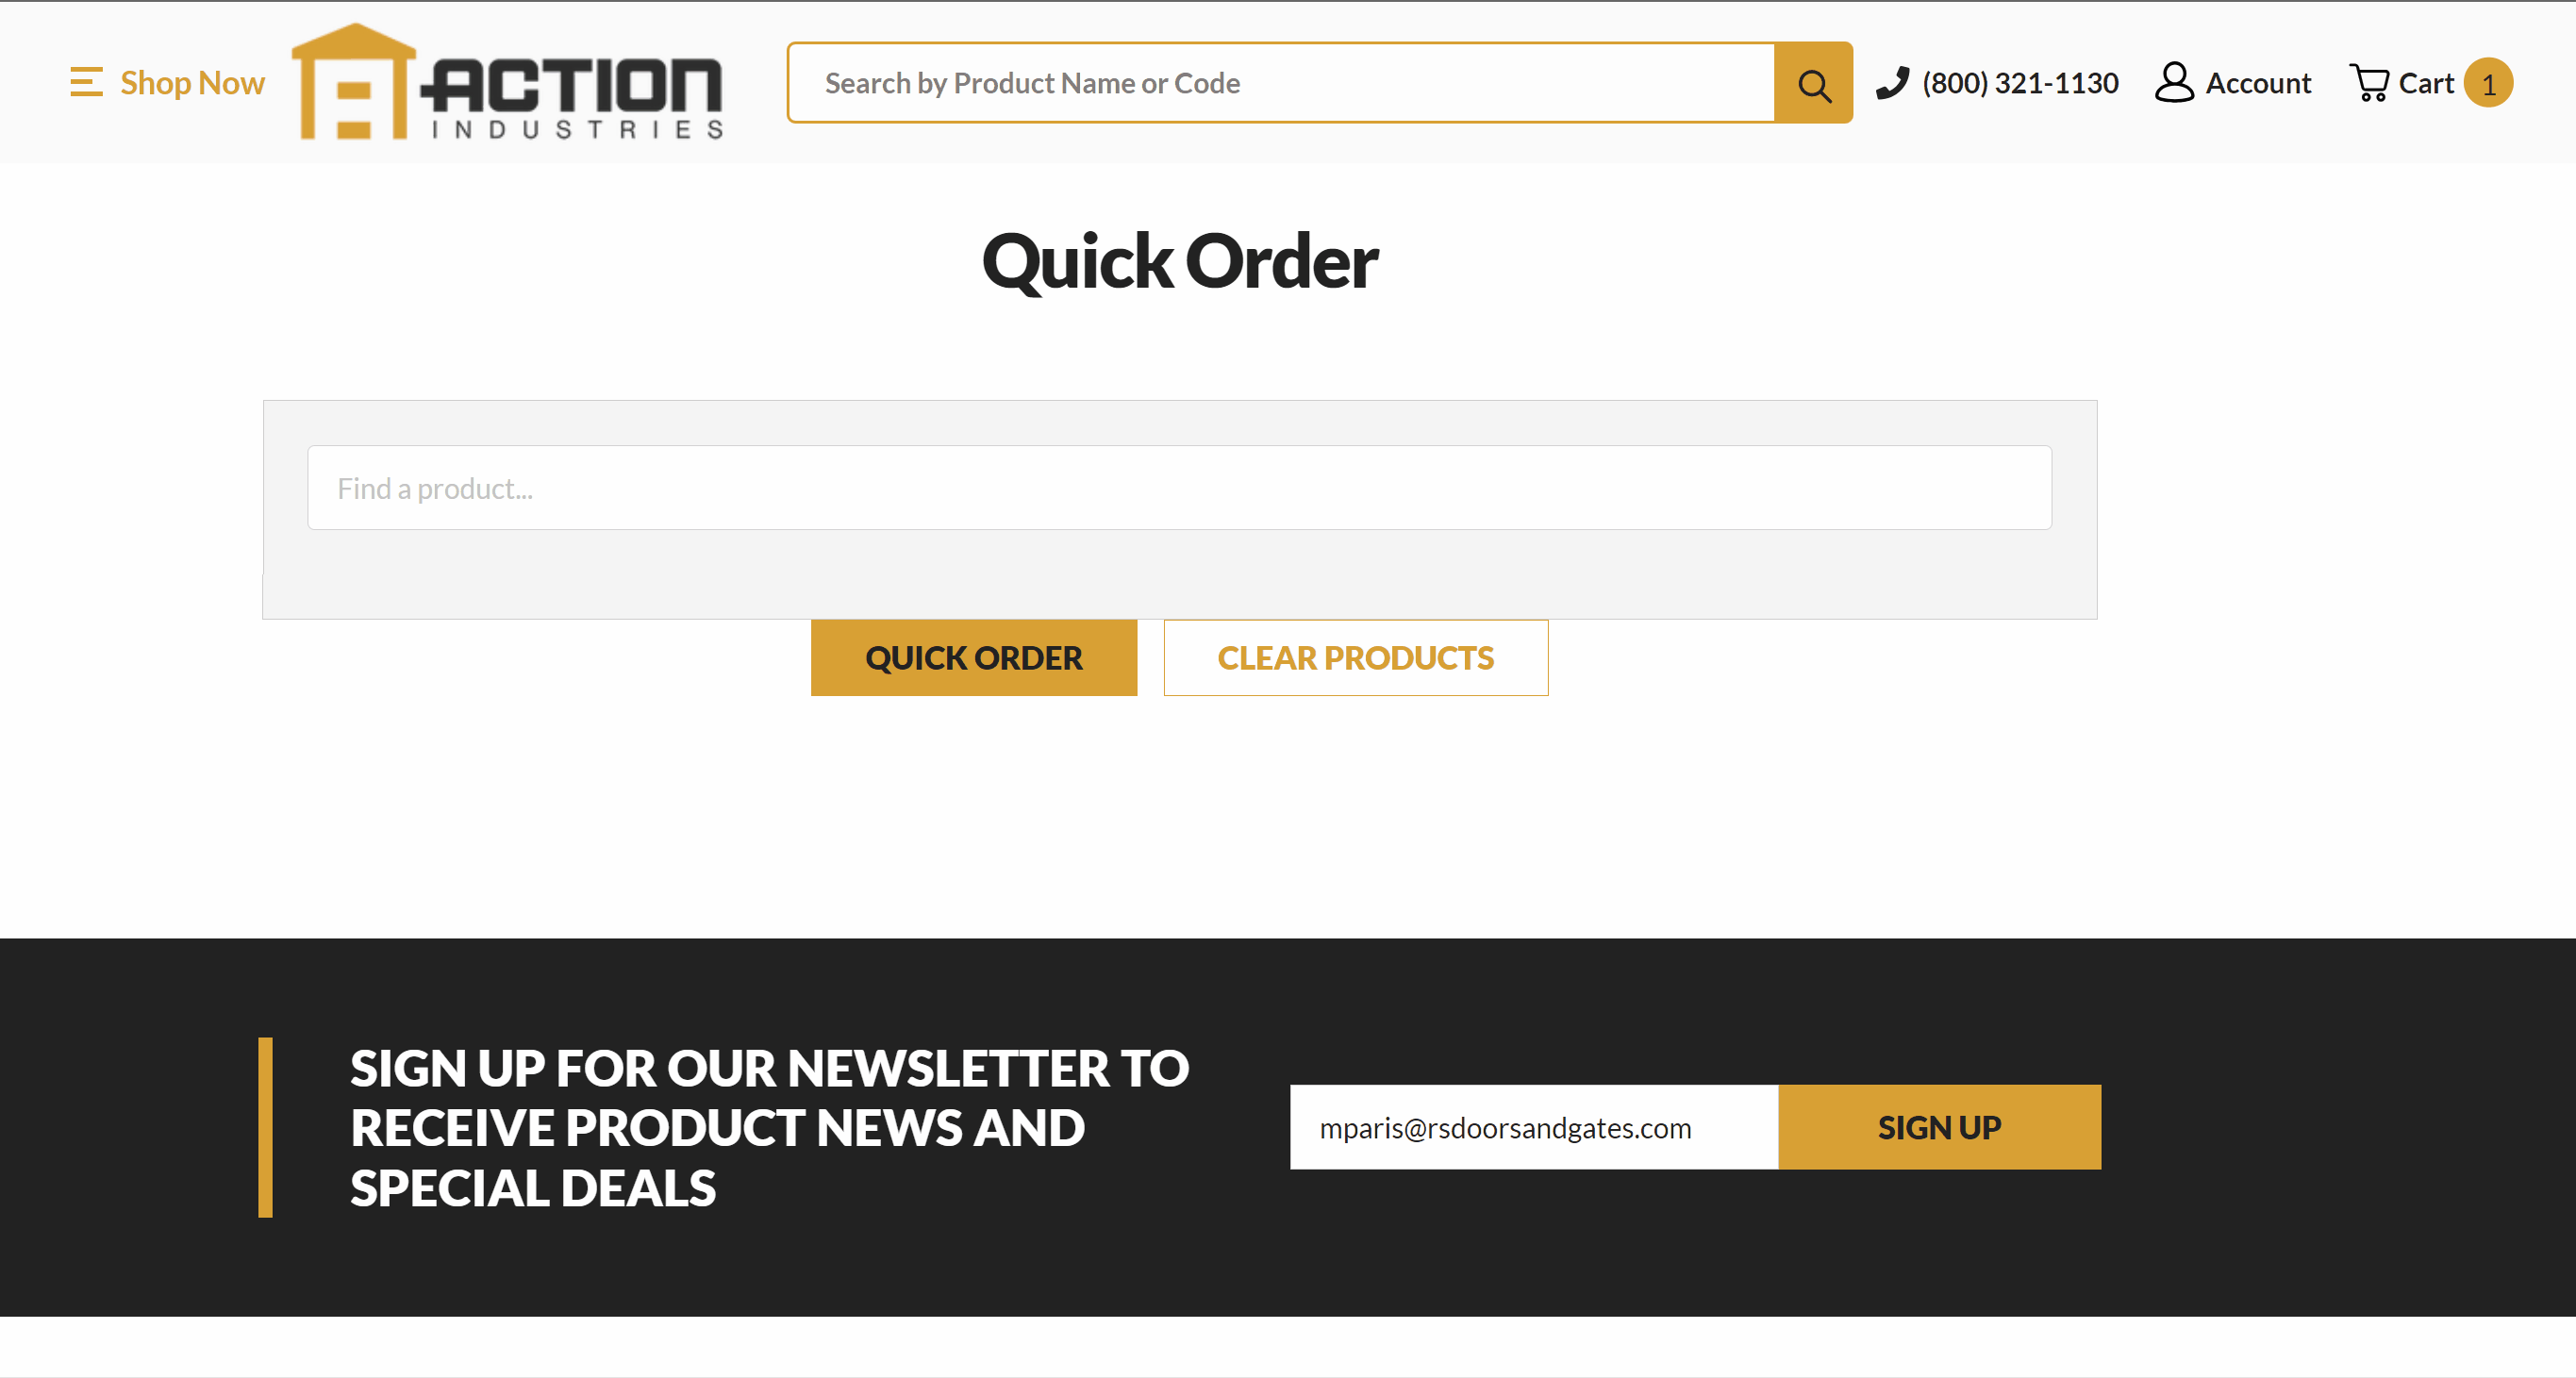 Quick Order Search functionality for Action Industries